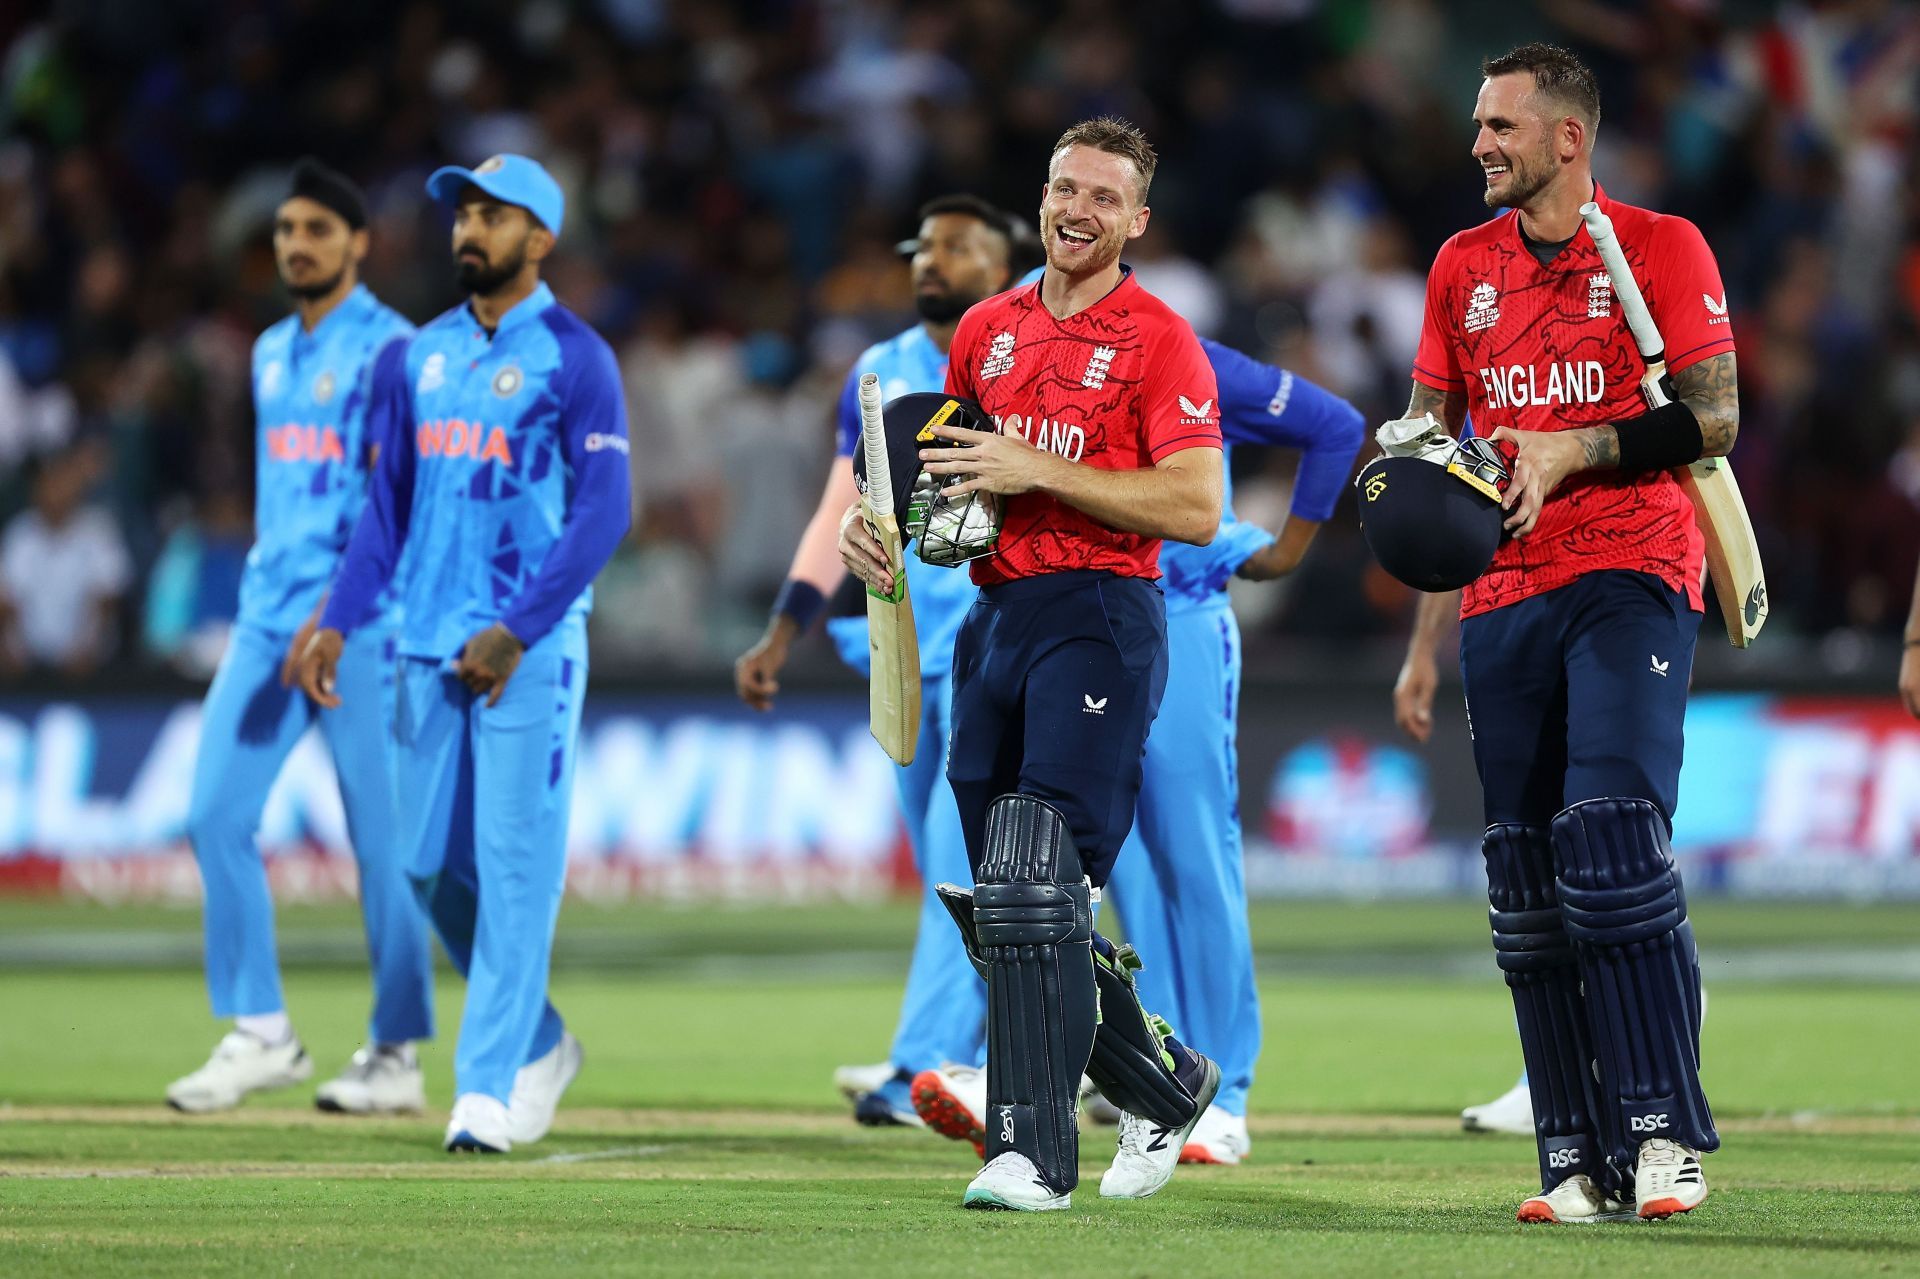 England annihilated India by 10 wickets in the T20 World Cup semi-finals.